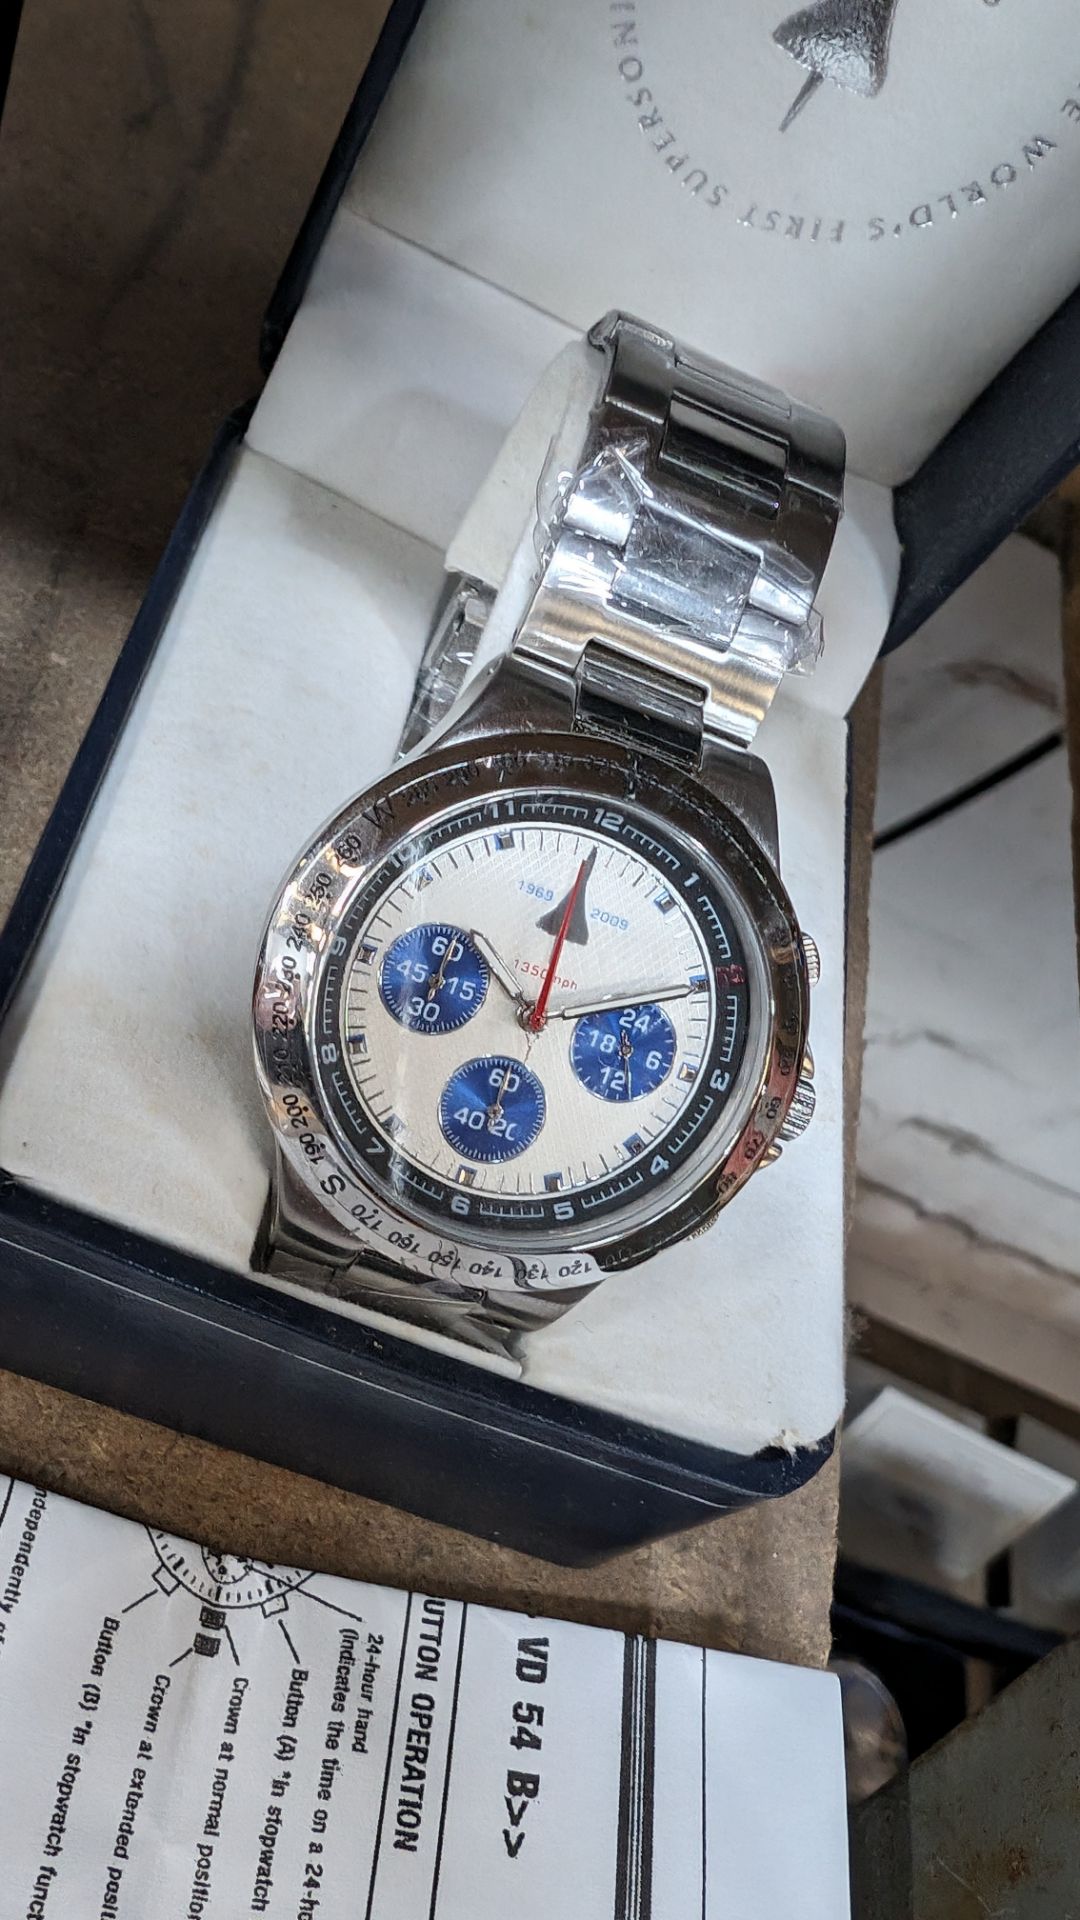 40th anniversary supersonic flight chronograph watch - Image 4 of 11